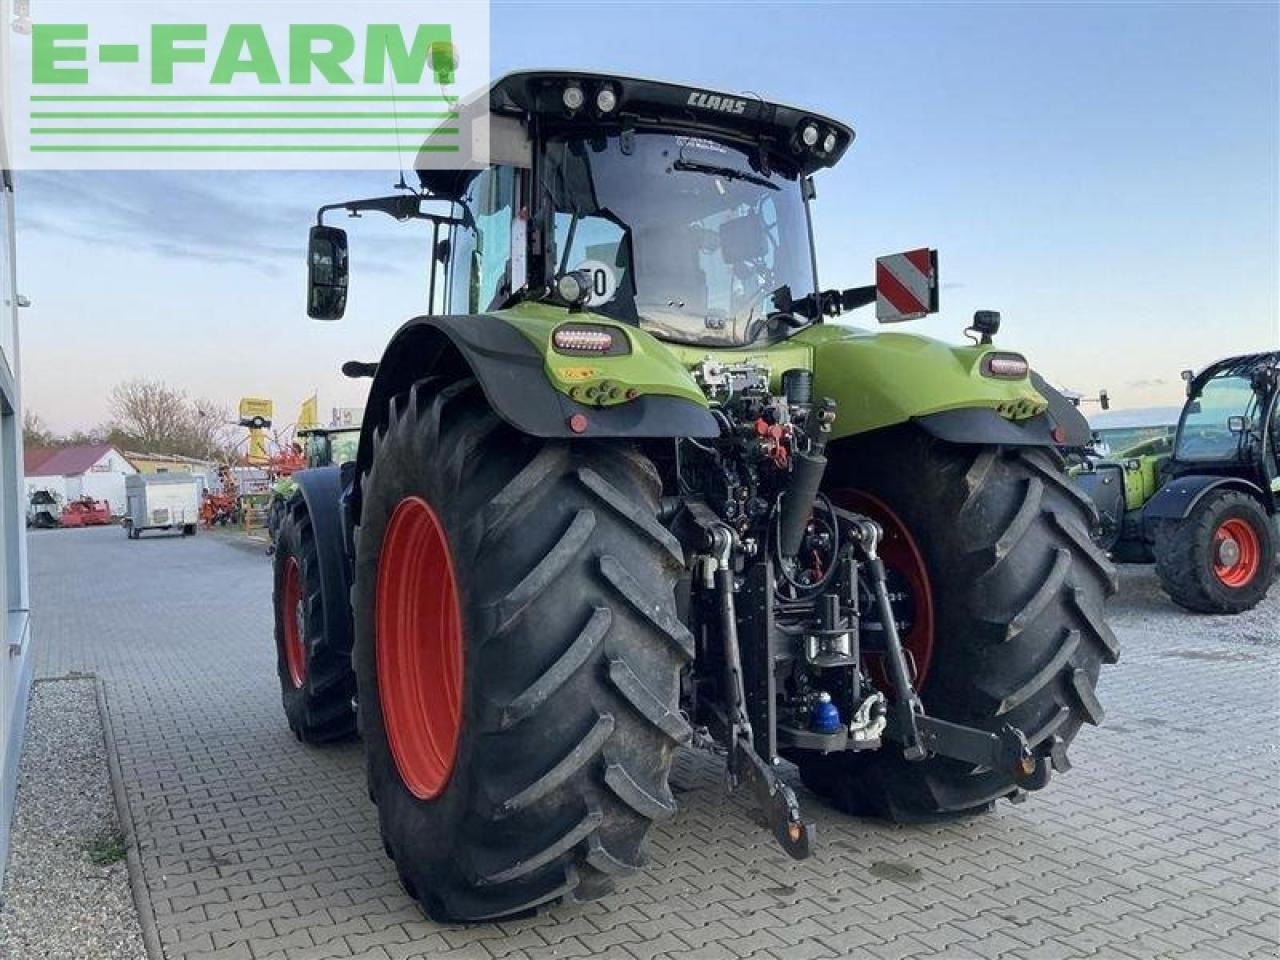 Tracteur agricole CLAAS axion 870 cmatic-stage v cebis